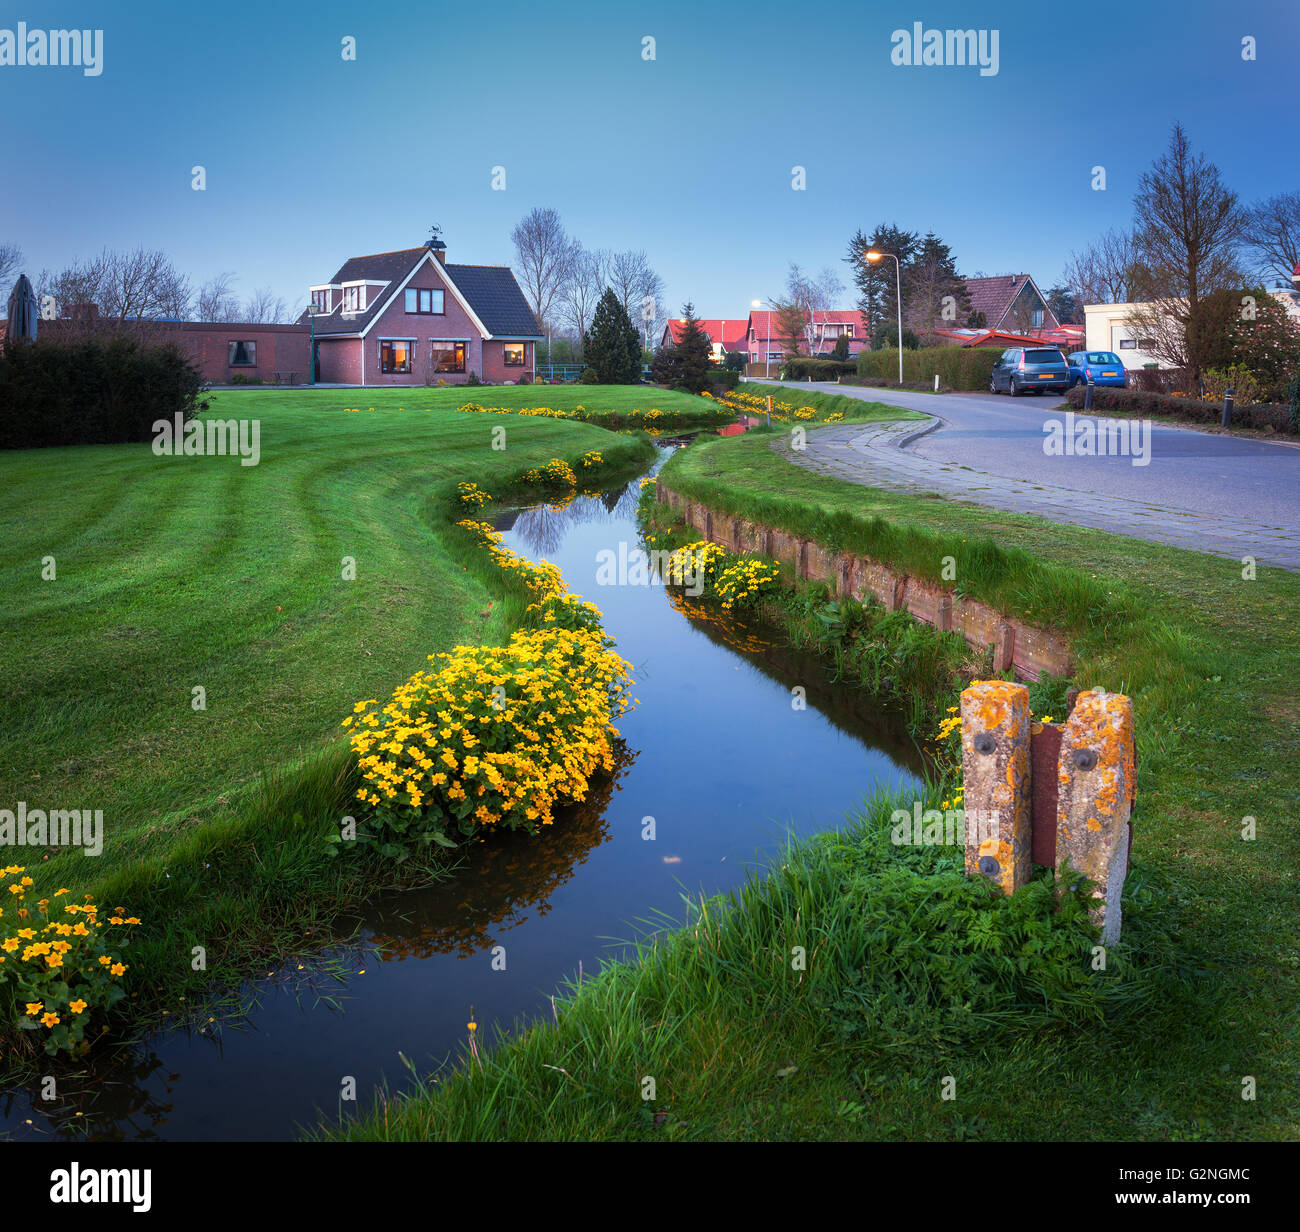 Landscape in dutch village with beautiful house reflected in water canal, courtyard with green grass , yellow flowers and road Stock Photo